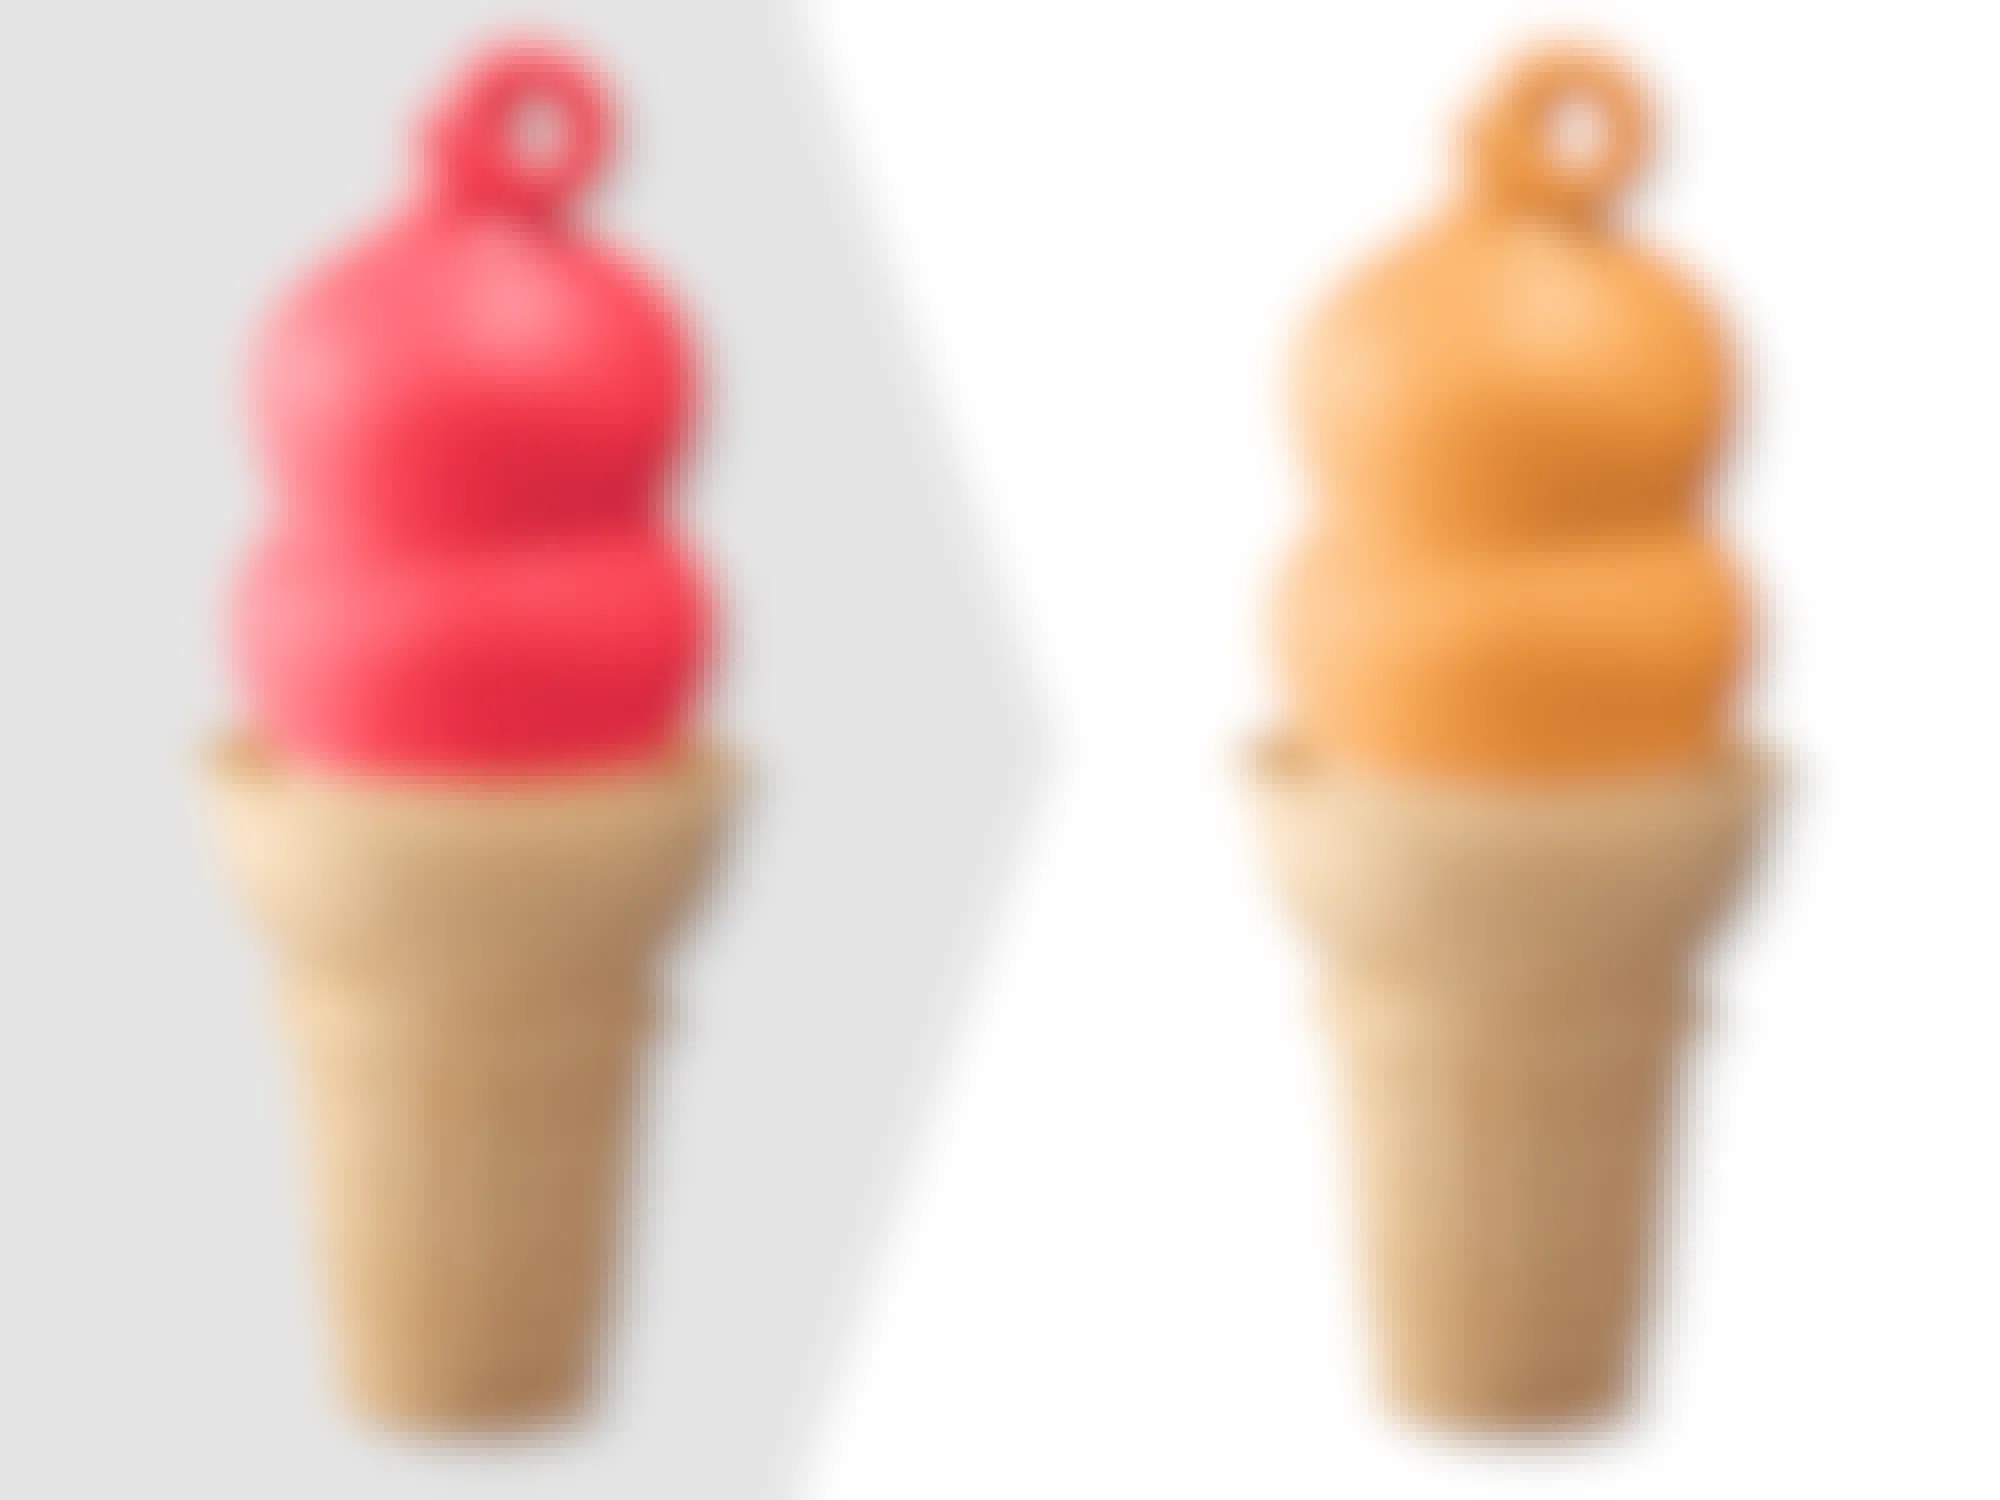 discontinued cherry dipped cone from dairy queen and its butterscotch dipped cone replacement